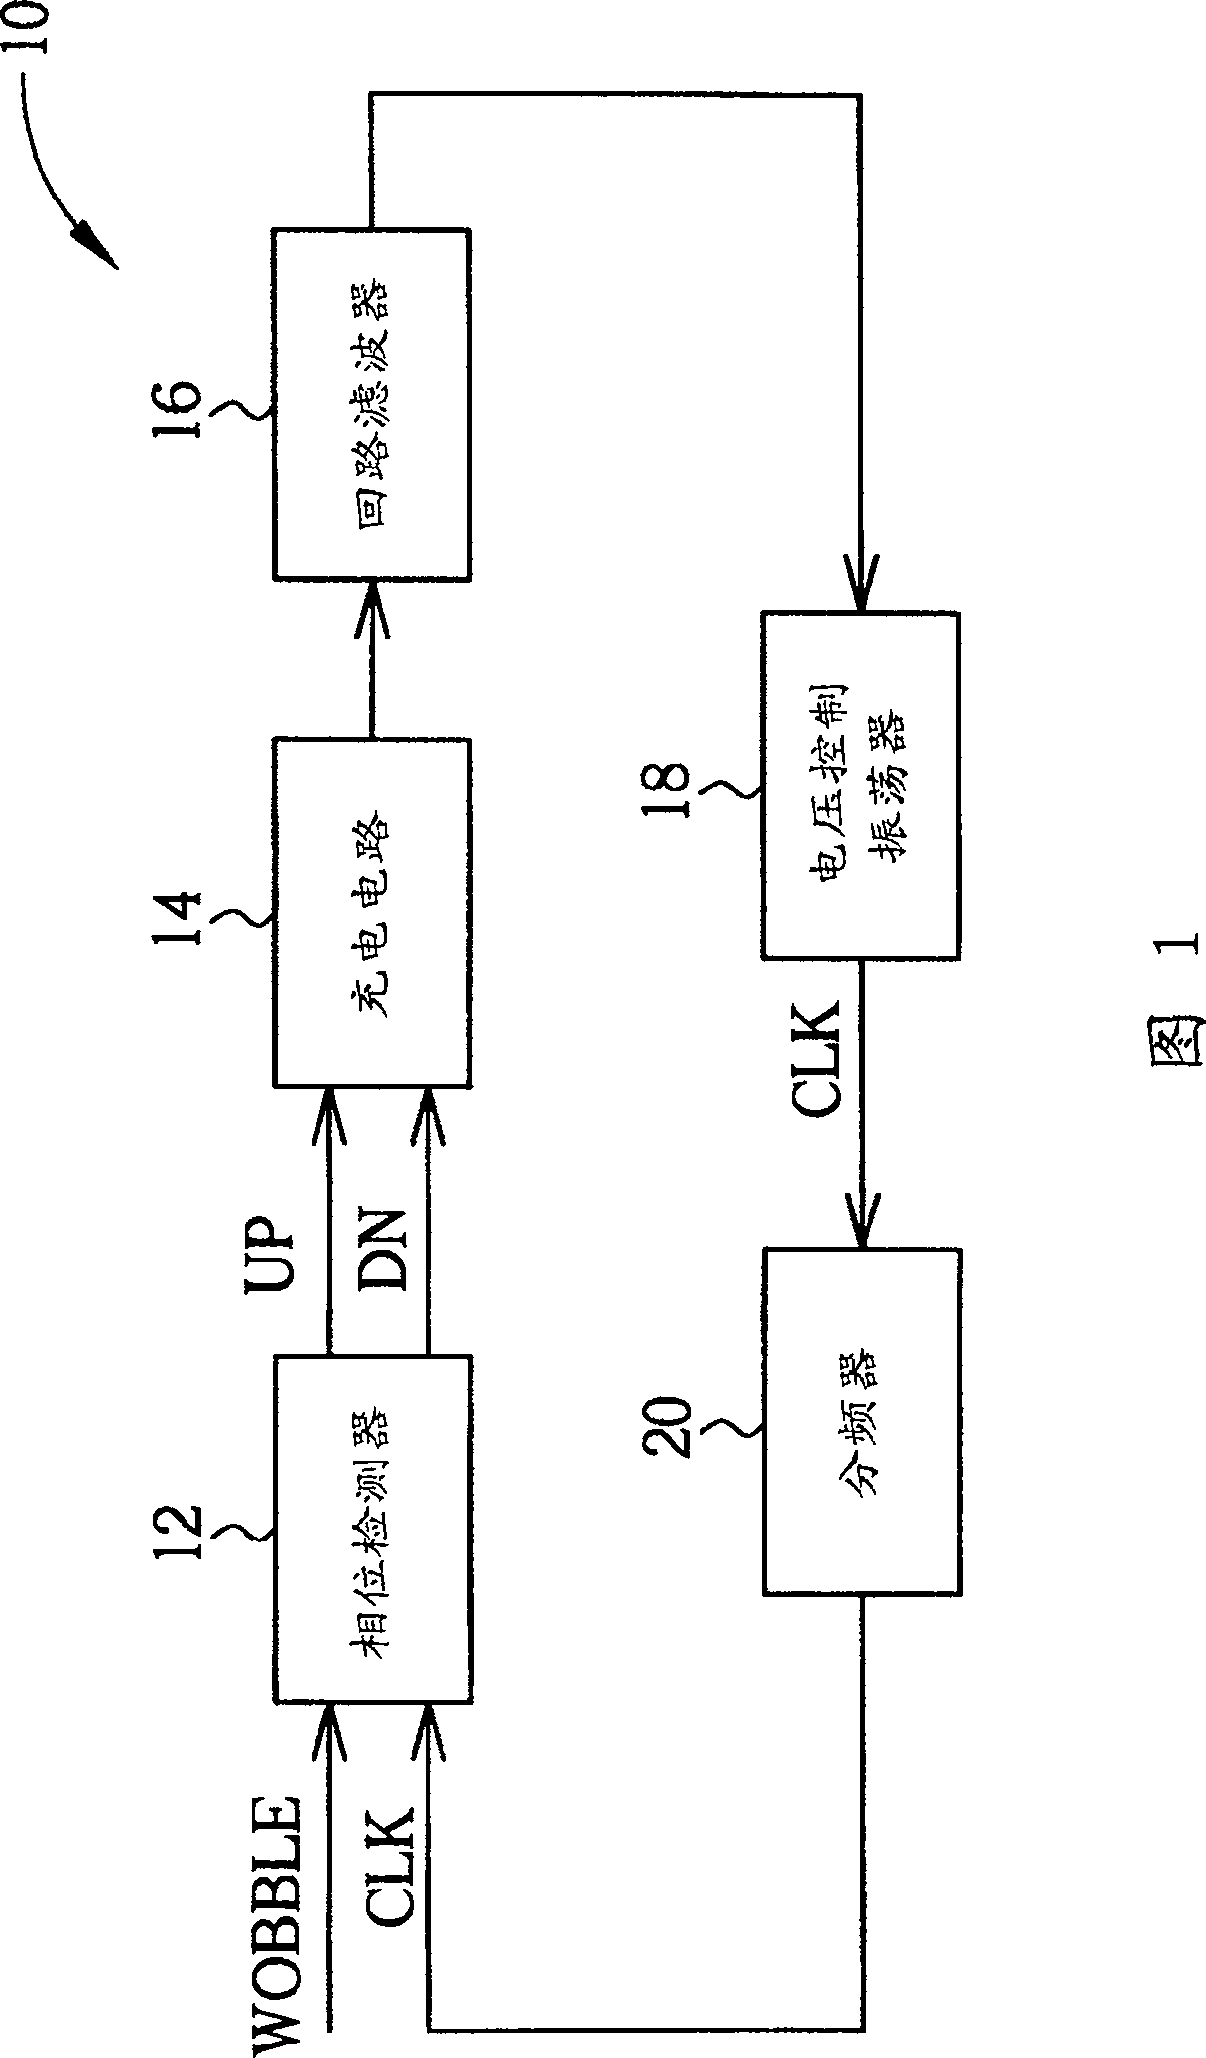 Phase locked loop for controlling recordable optical disk drive